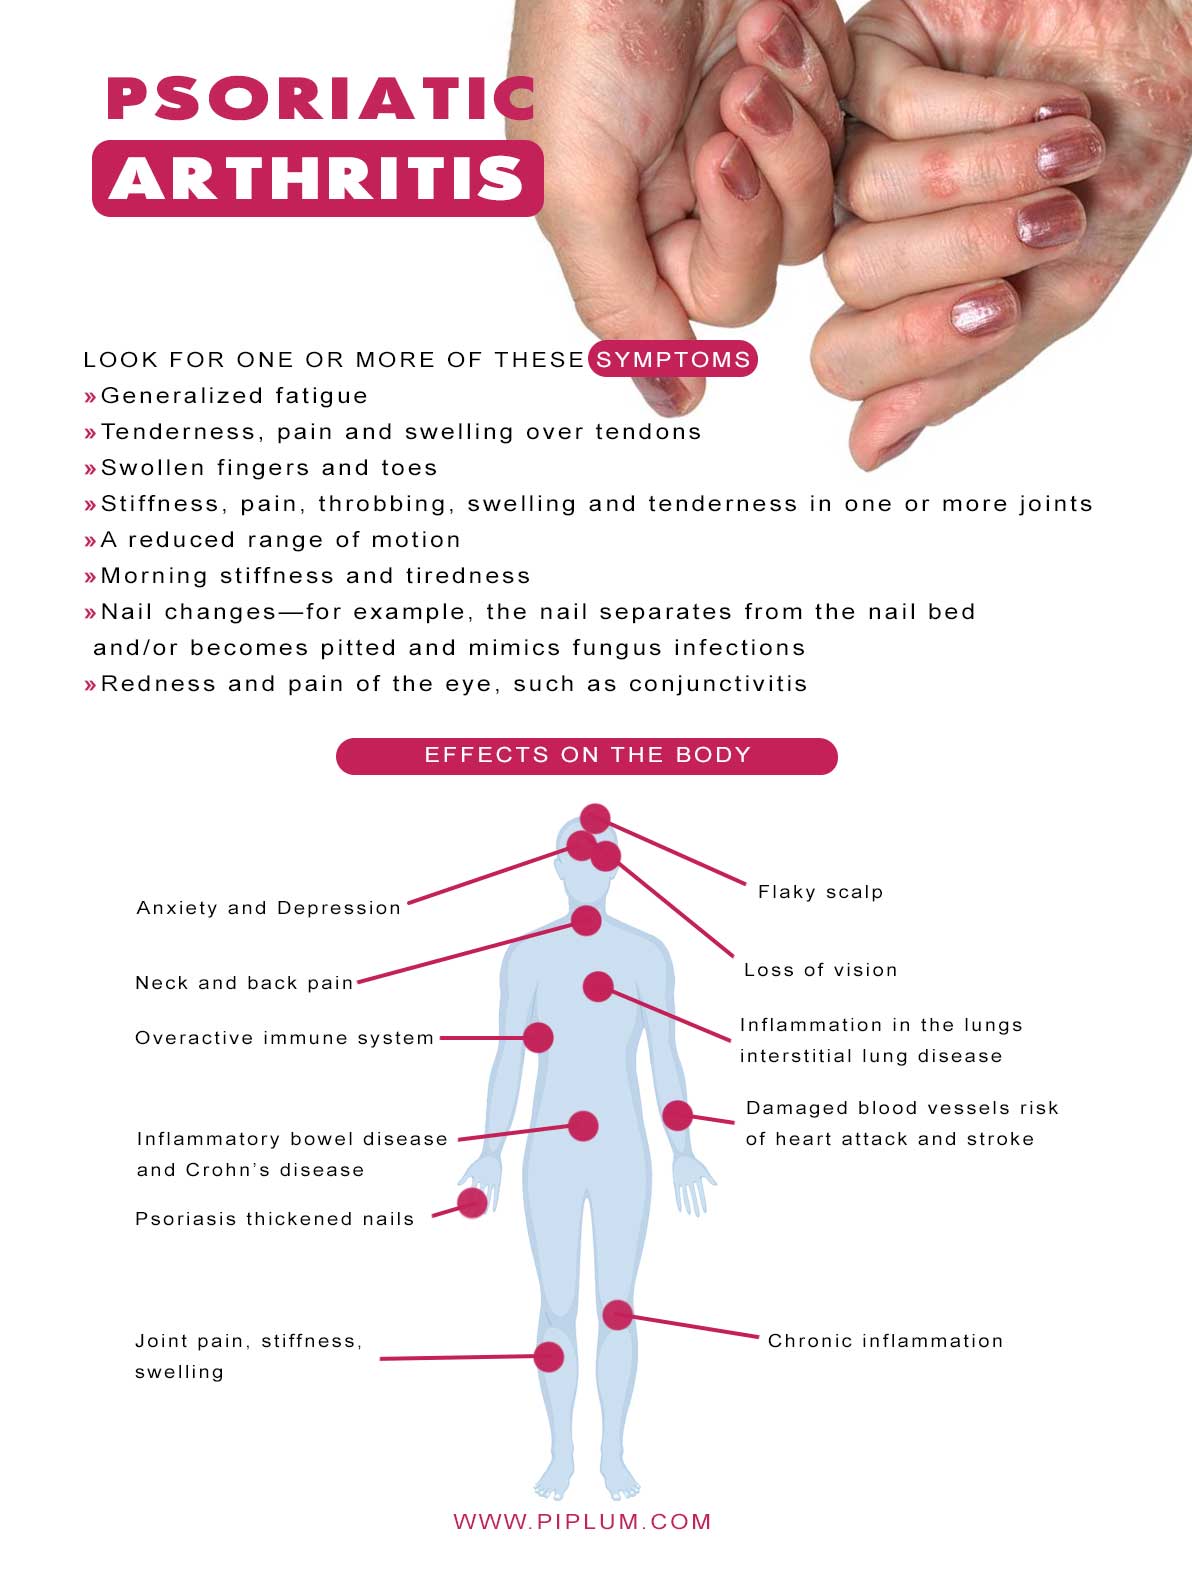 psoriatic-arthritis-affects-on-the-body-and-symptoms-infographic-poster-list-remedies